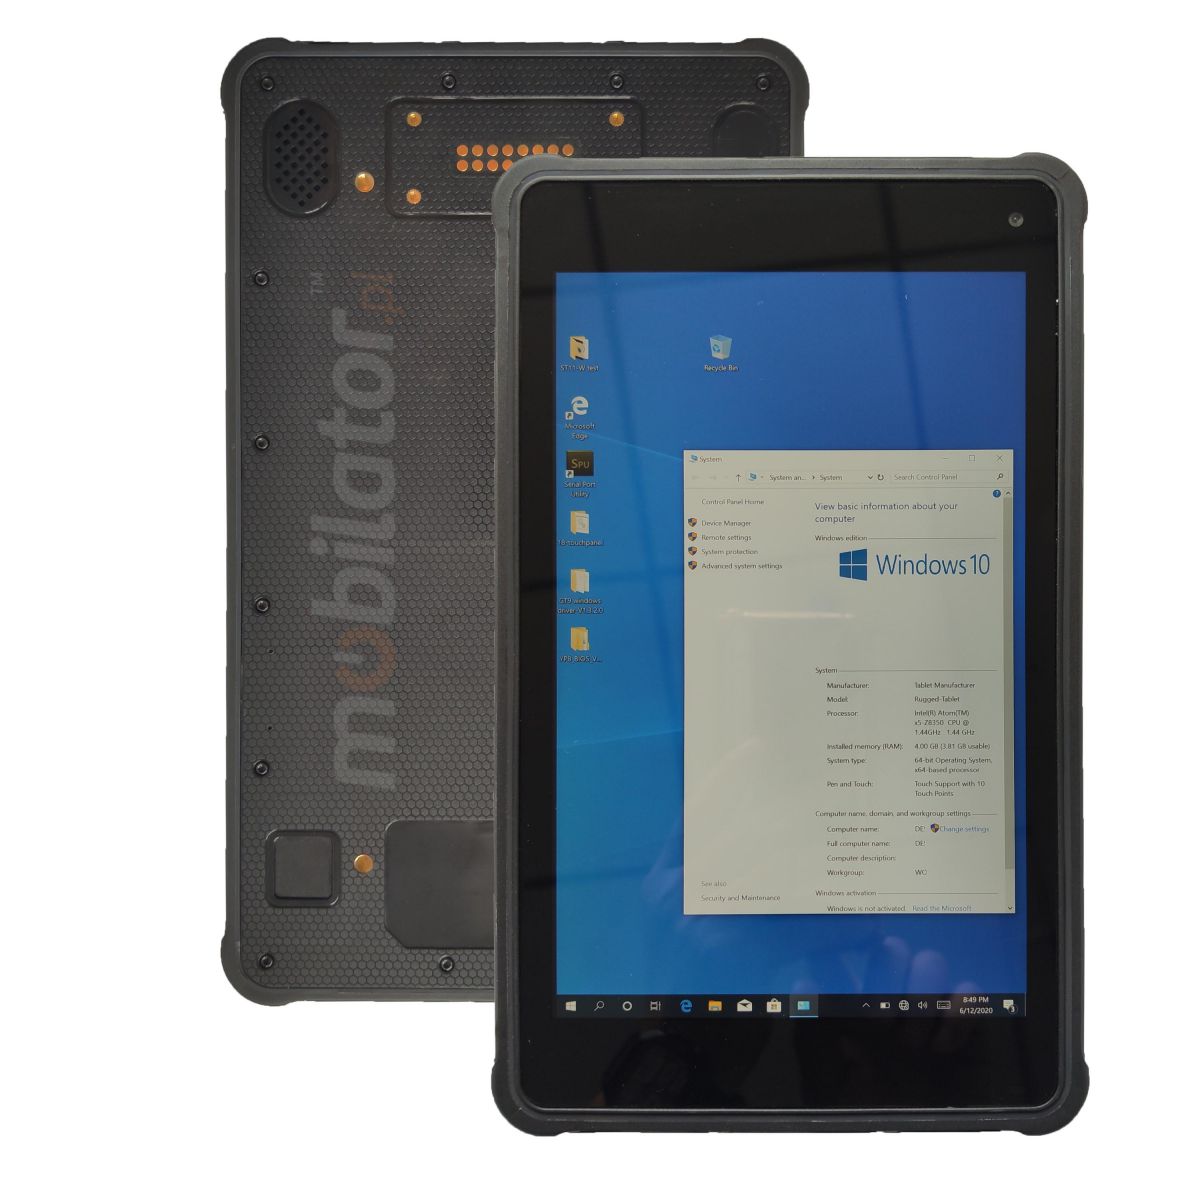 Rugged tablet with a capacitive screen and IP65 standard, 4GB RAM, 64GB disk, NFC and Honeywell N3680 2D scanner - MobiPad ST800B v.2 